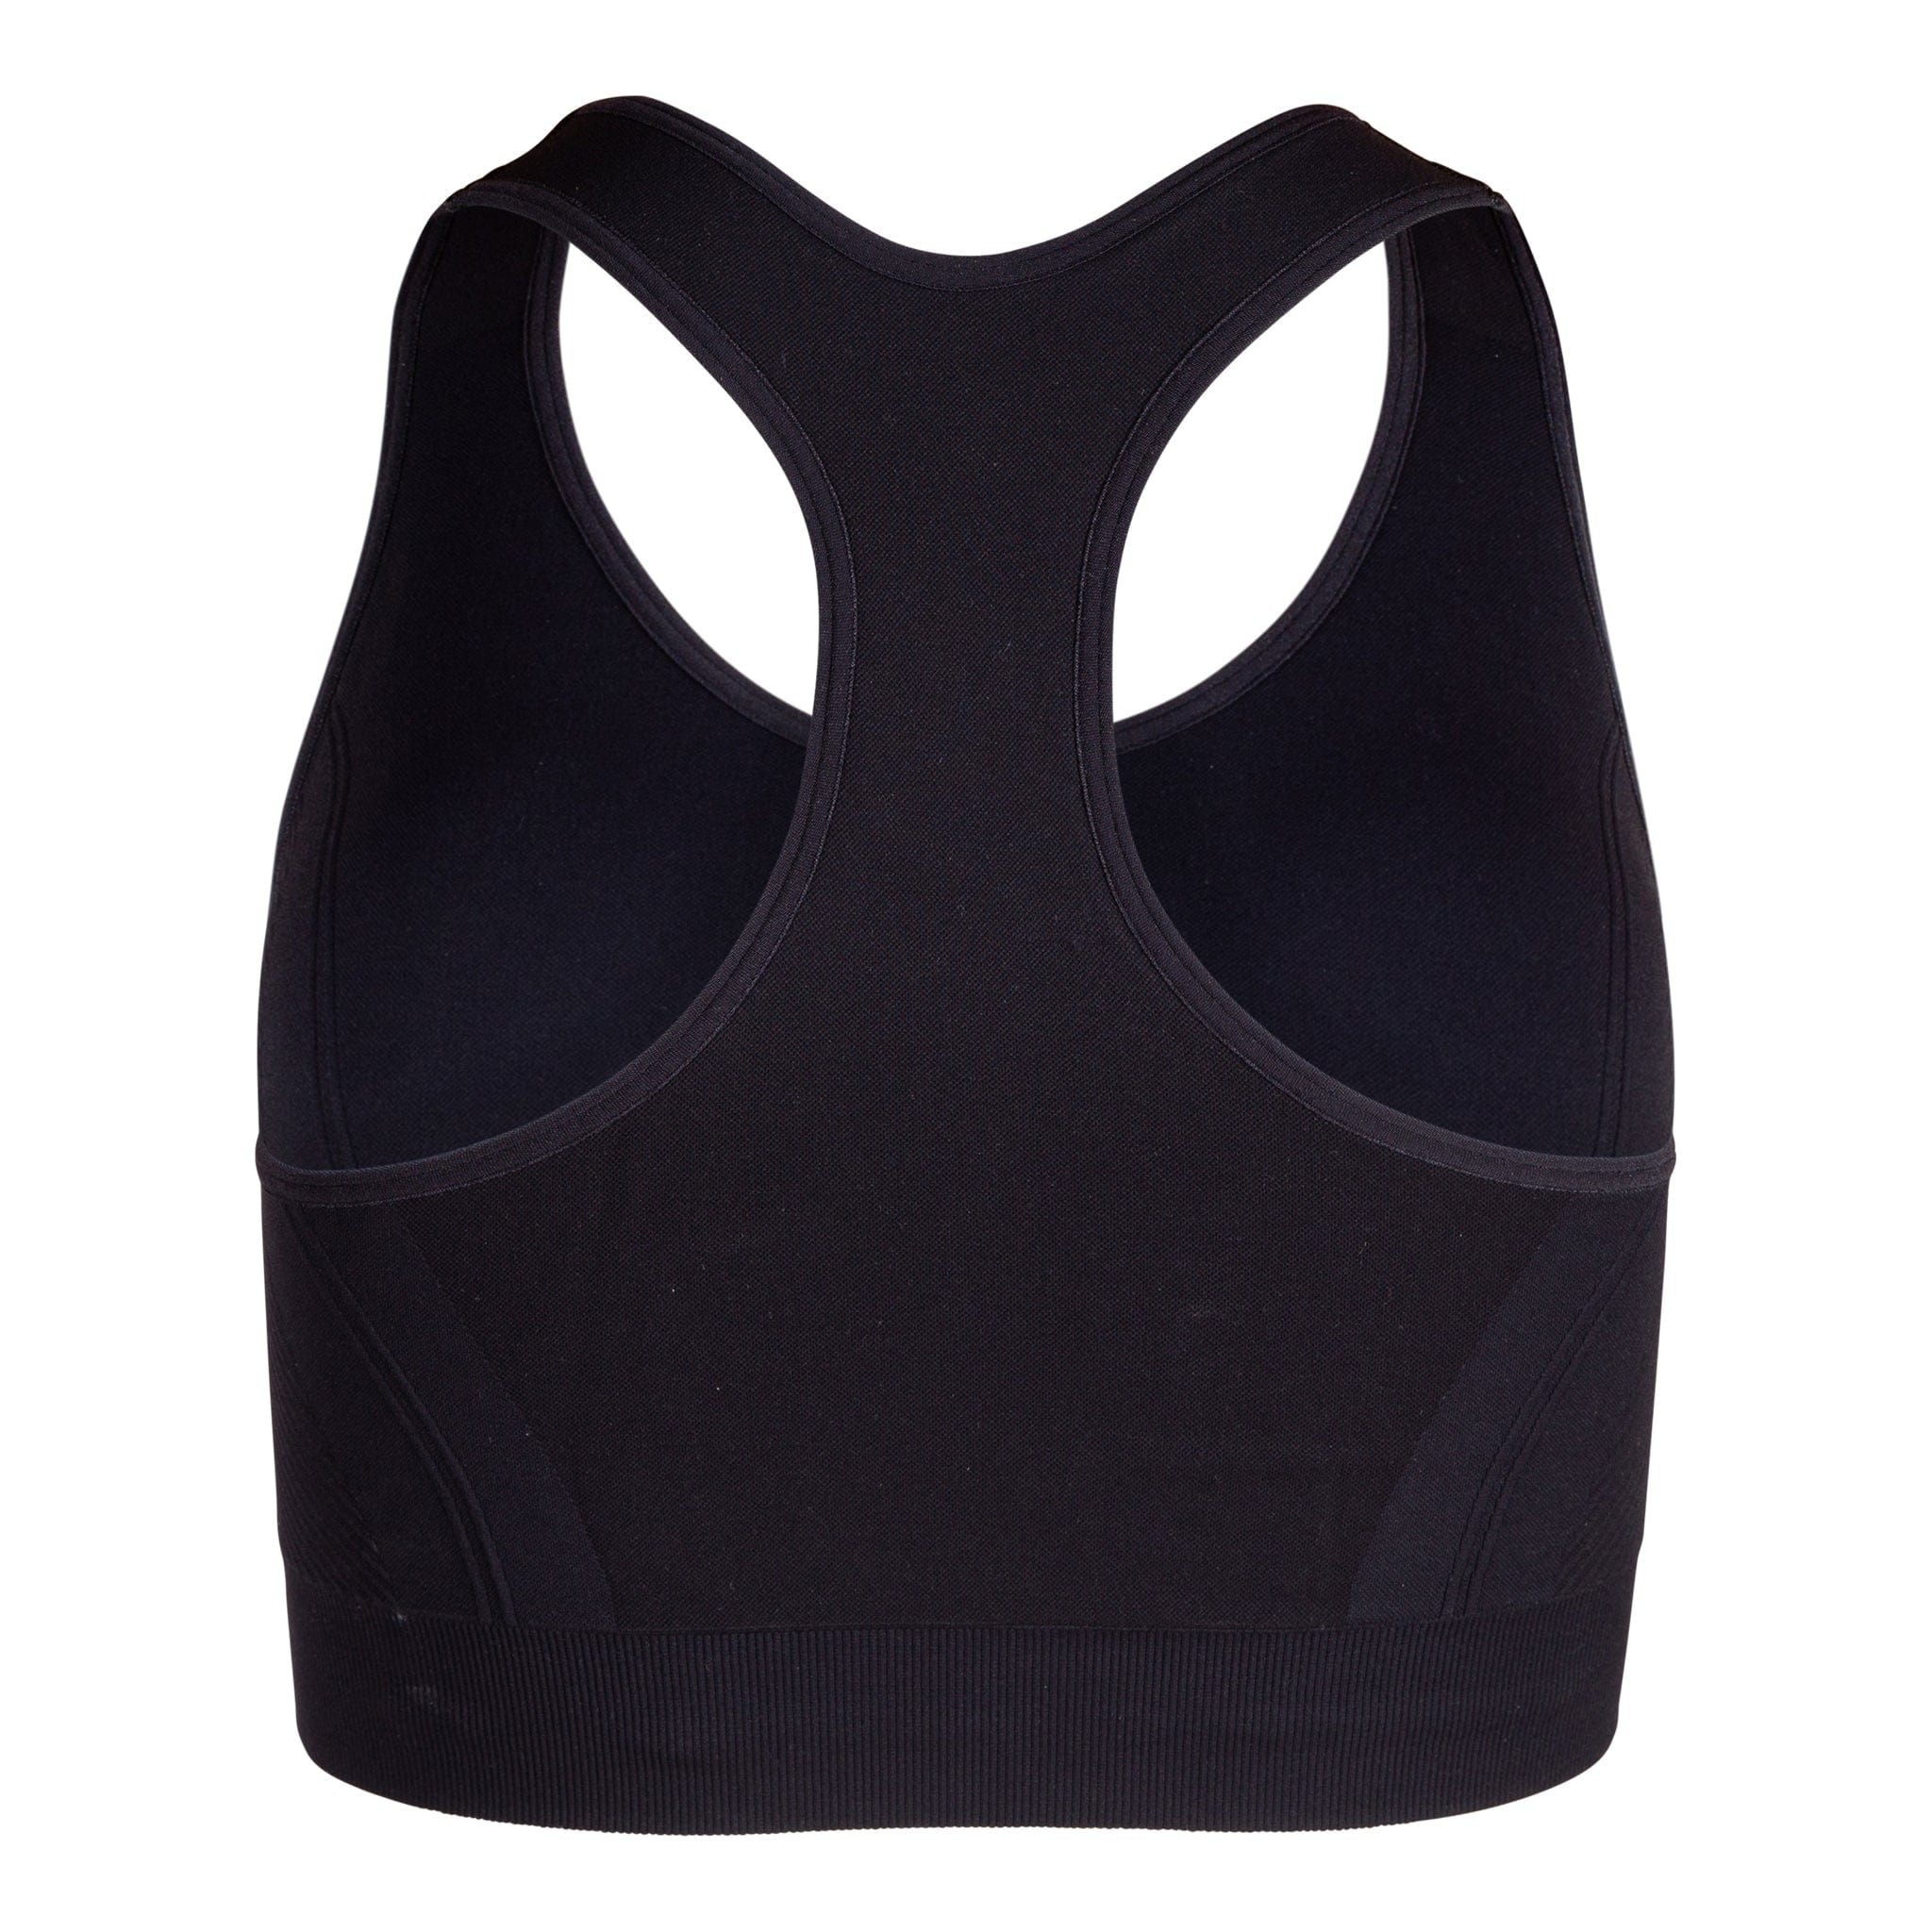 Women's - Compression Fit Sport Bras or Sleeveless in White or Blue or Gray